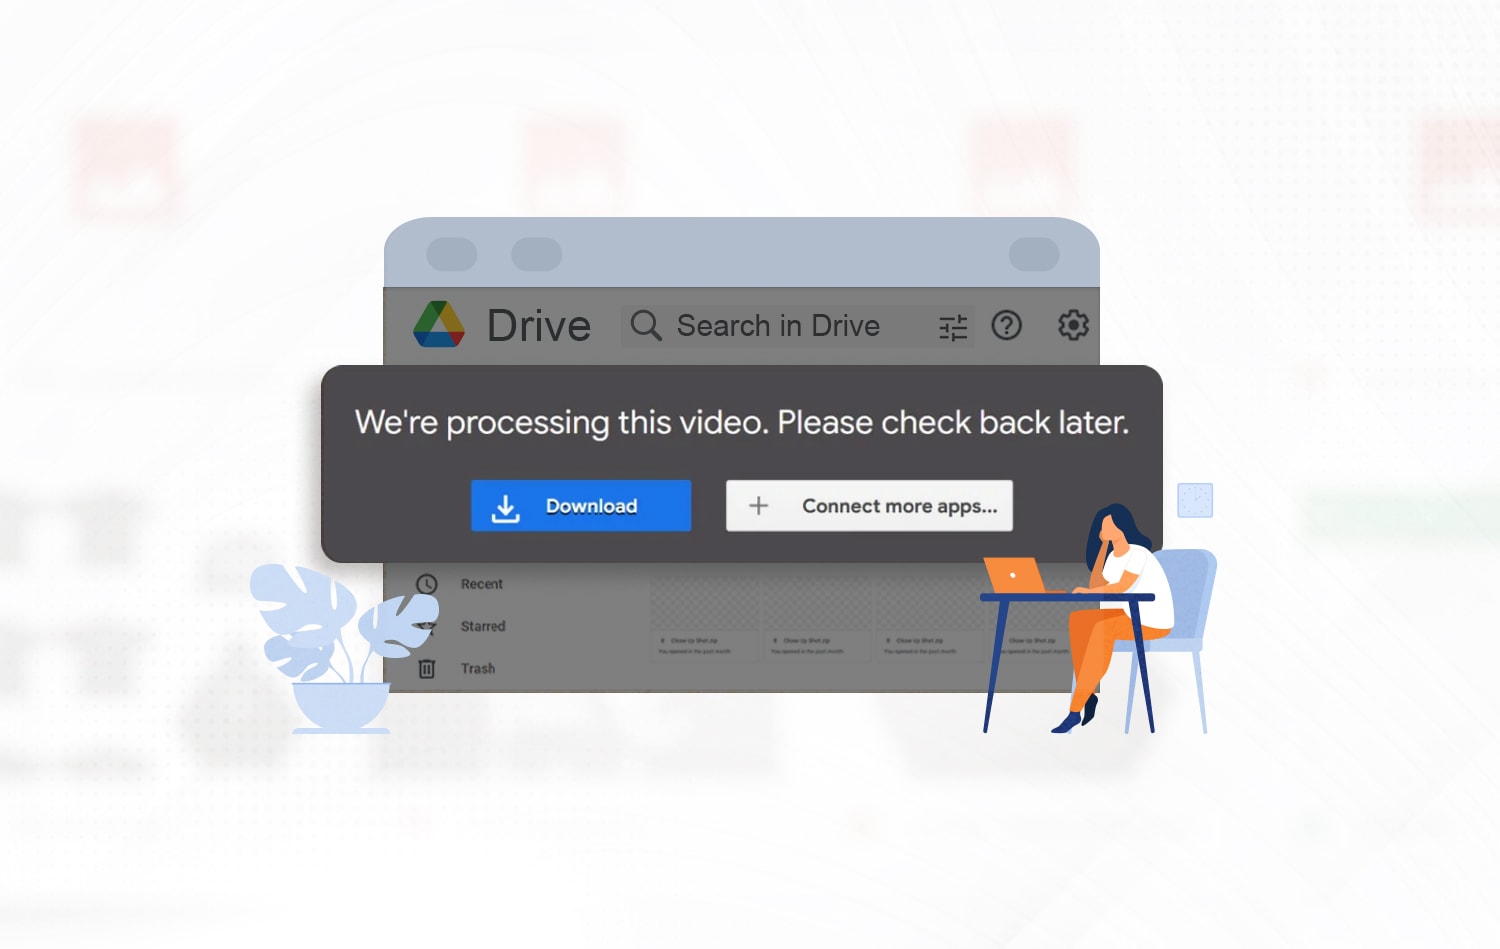 How to Fix “We’re Still Processing This Video” on Google Drive